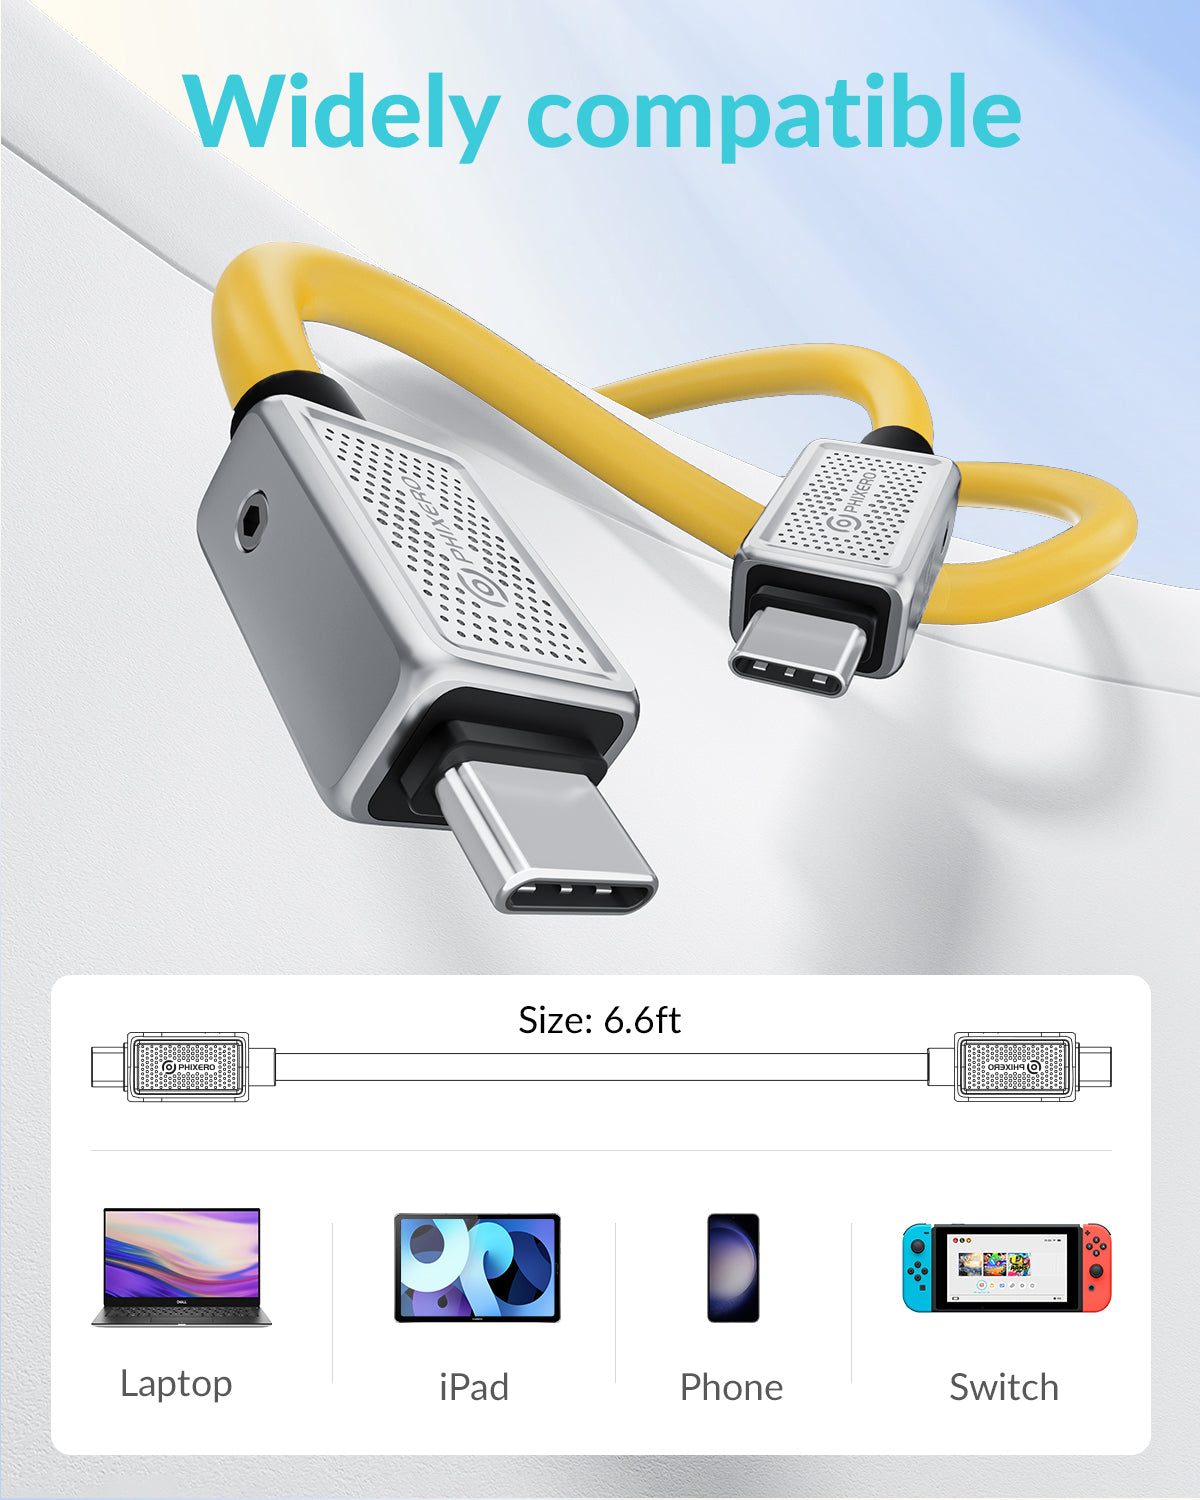 PHIXERO USB 3.2 Gen 2 * 2 Cable 6.6 ft, 20Gbps Data Transfer Cable and 4K/60HZ USB C Video Cable, 240W Fast Charging Cable Compatible with Thunderbolt 3, MacBook Pro, iPad Pro, Samsung(Yellow)